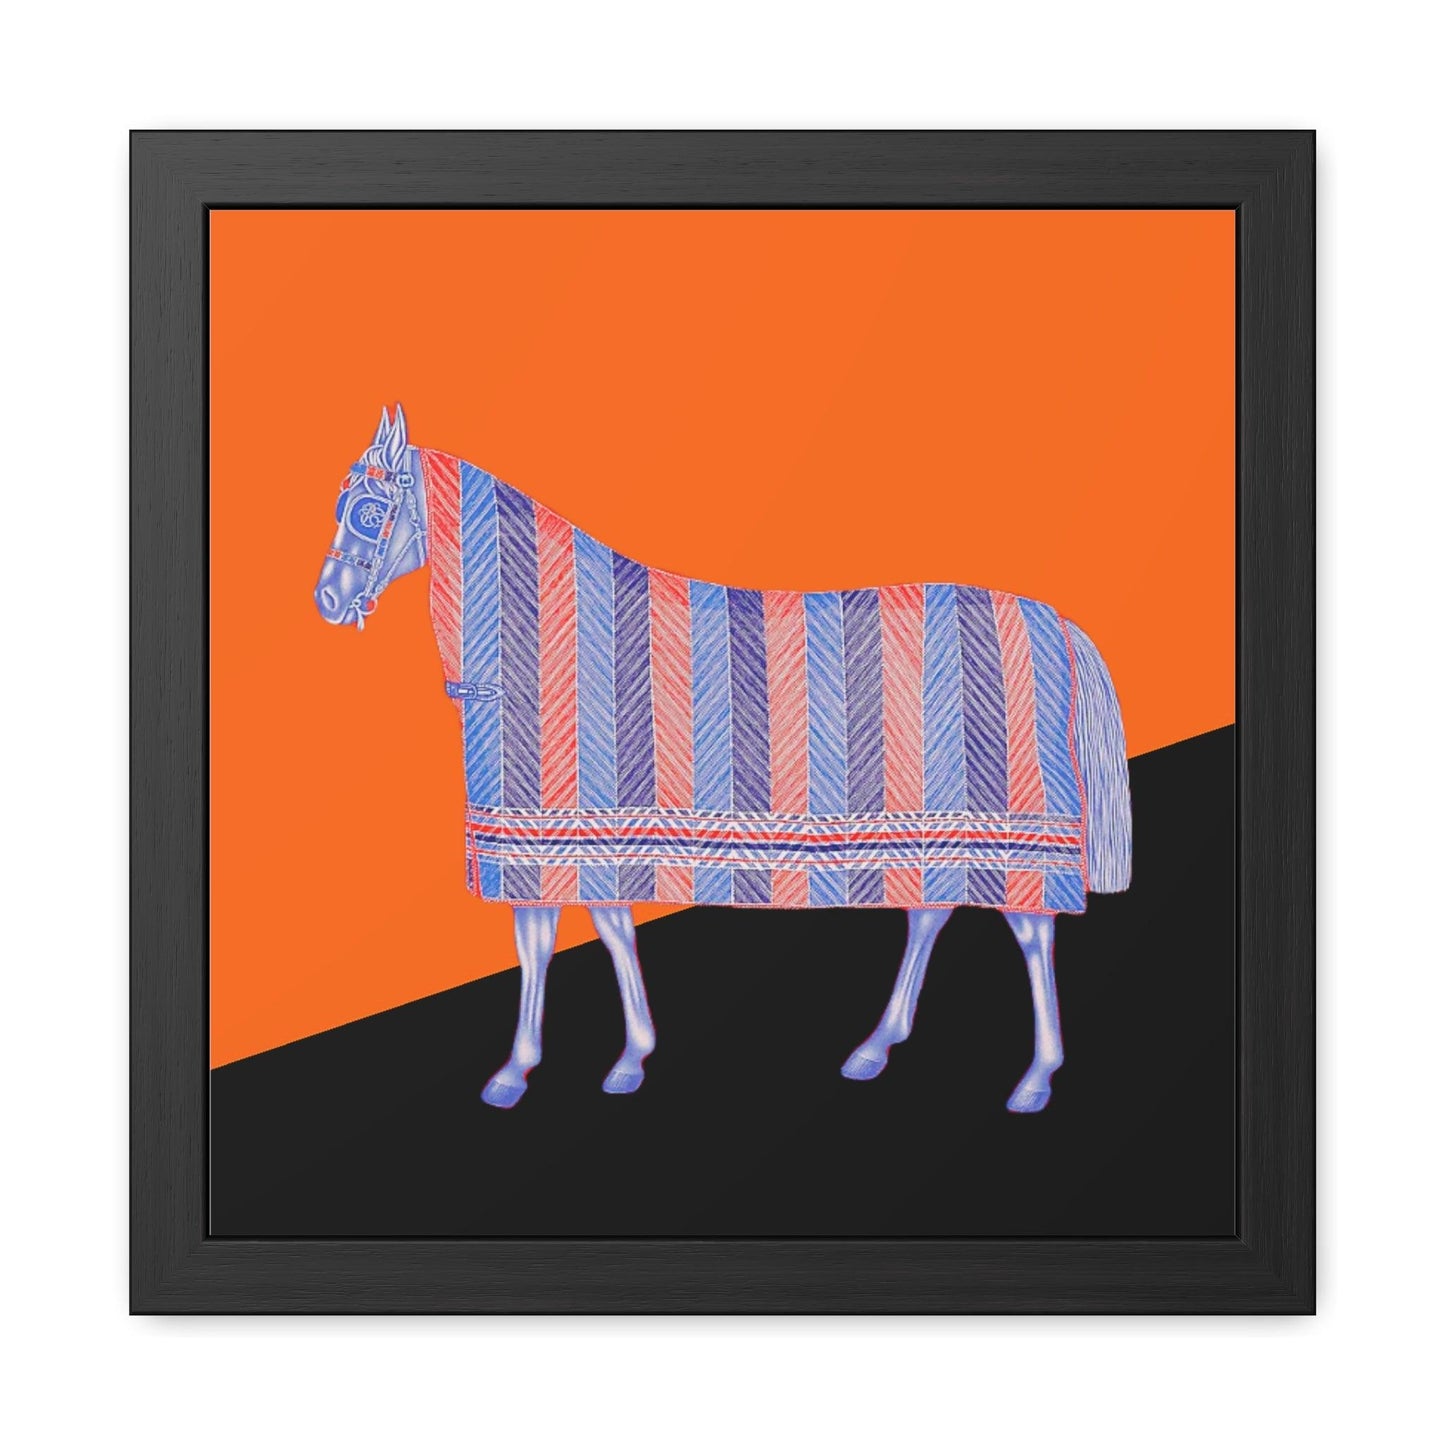 House of Horse Framed Poster Wall Art House of Horse Framed Poster Wall Art House of Horse Framed Poster Wall Art 